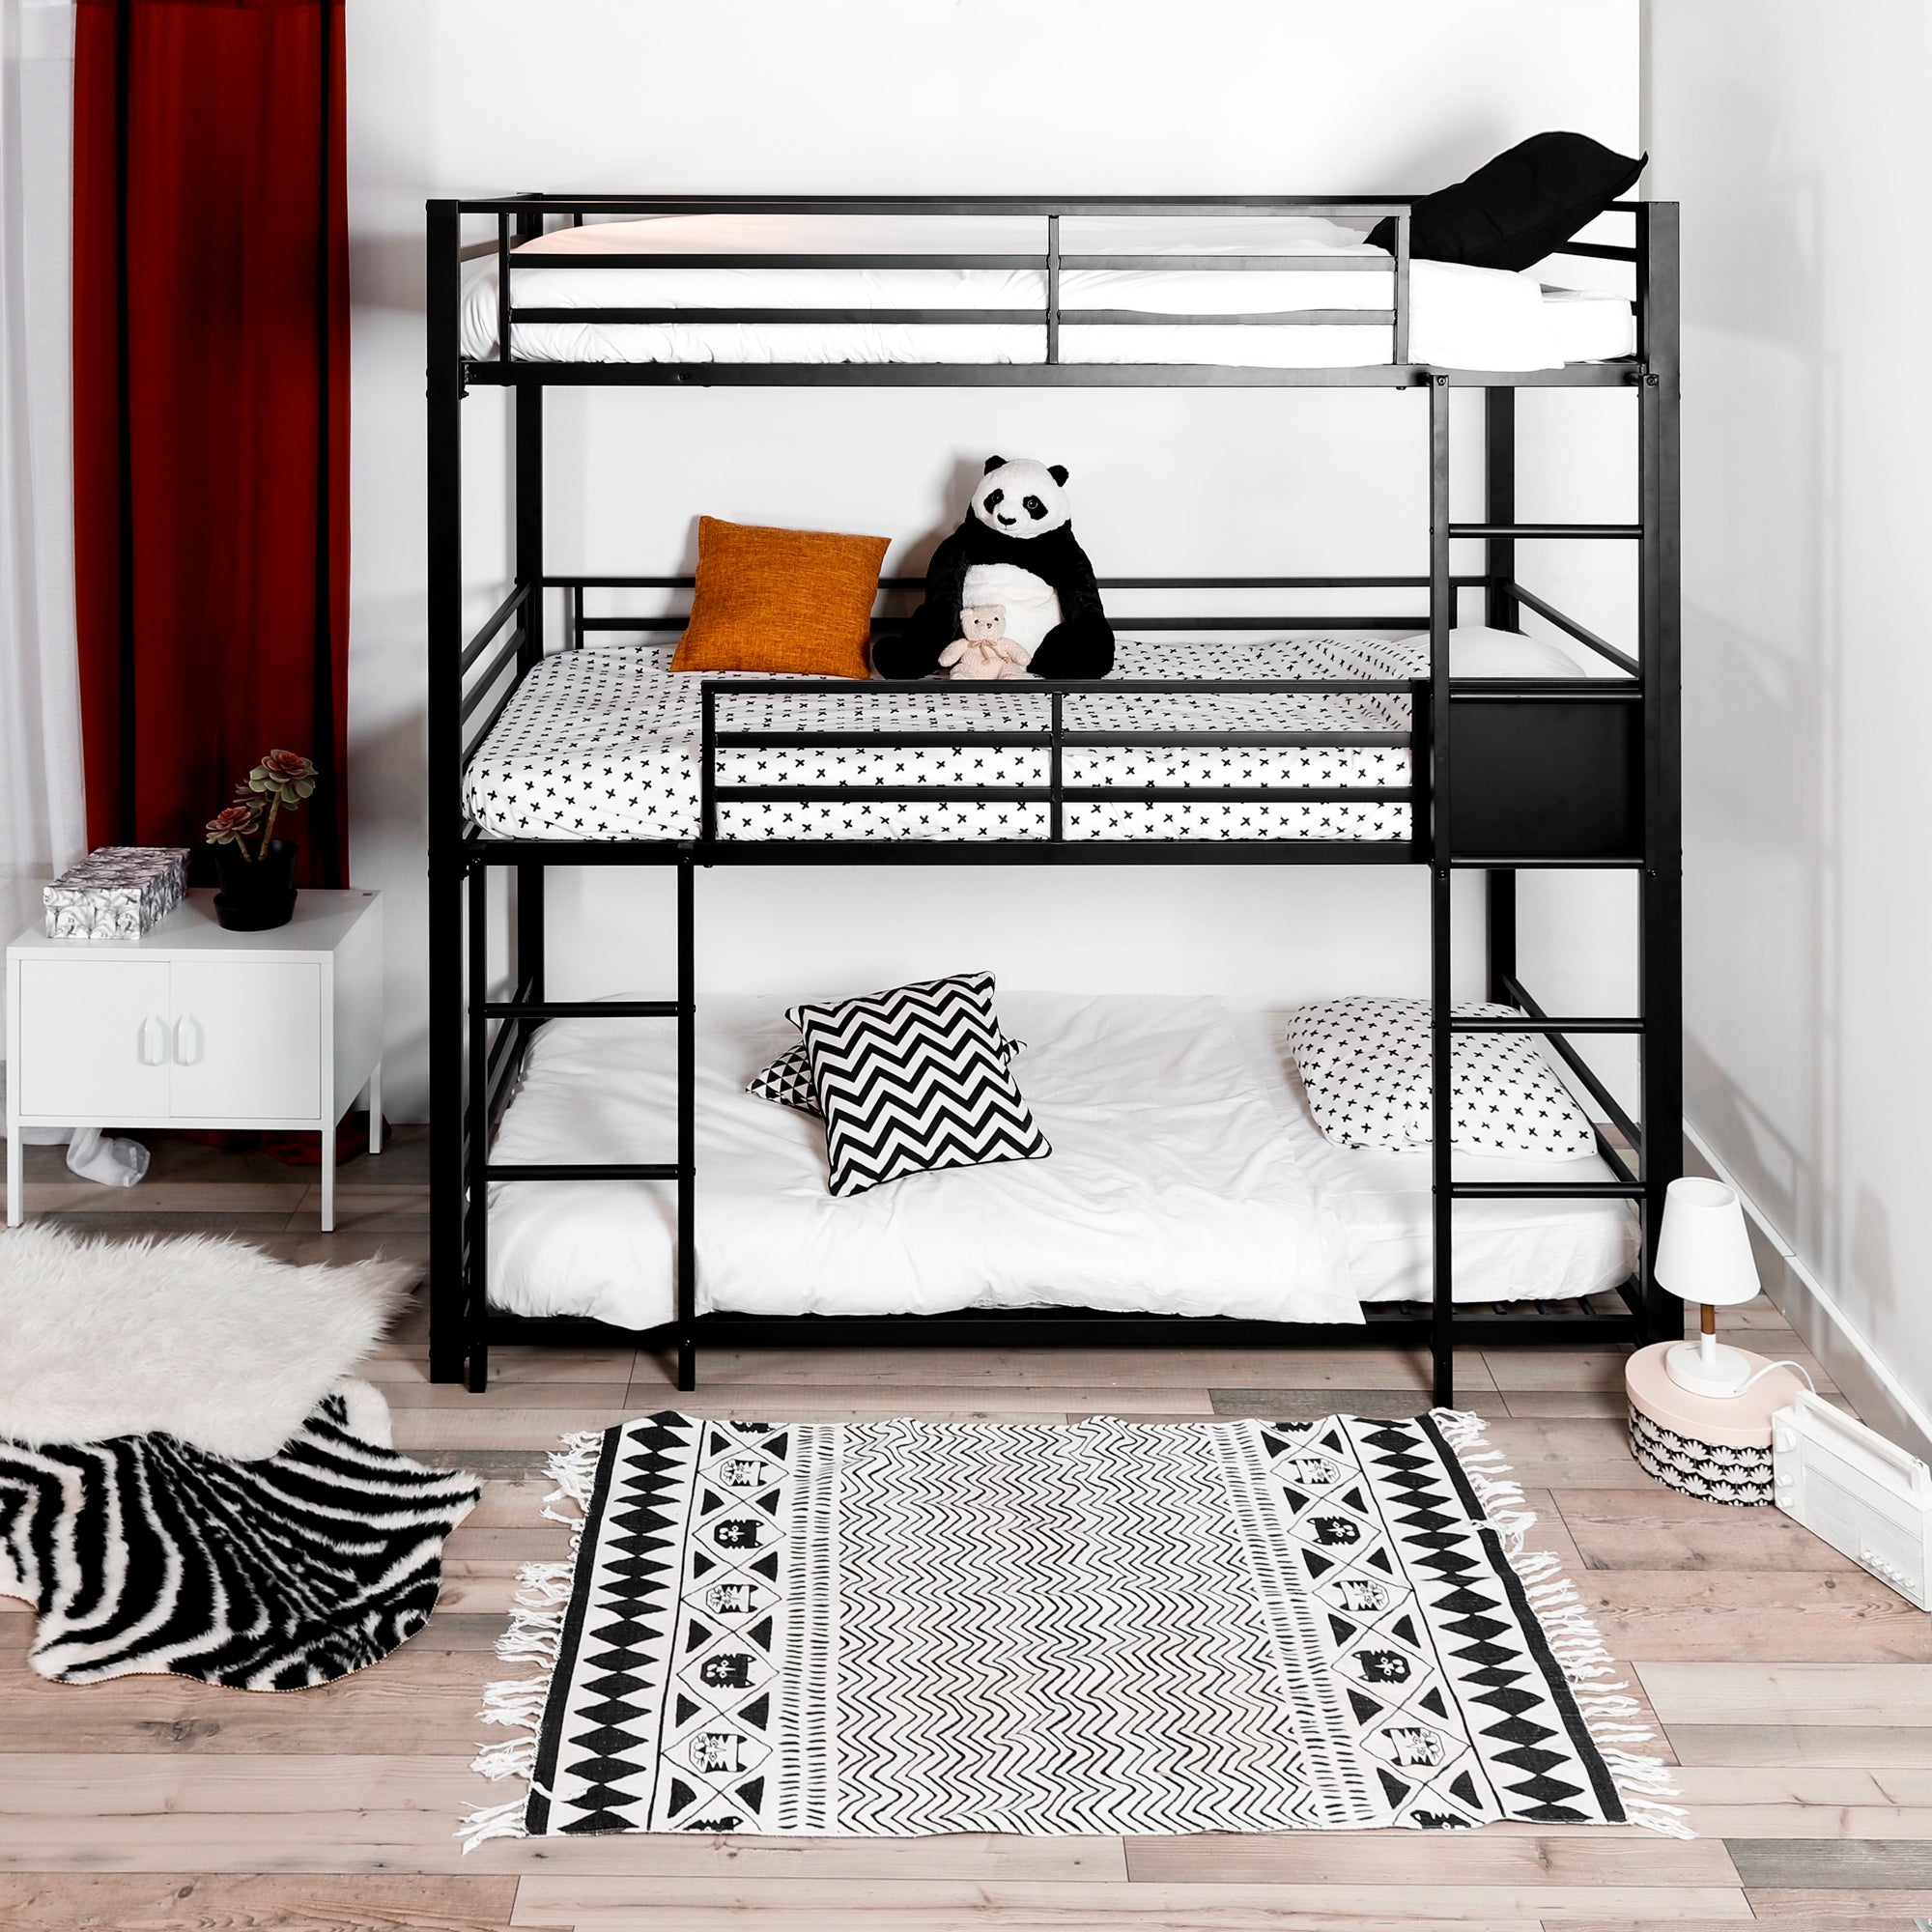 Bunk bed 3 places and 3 floors in black metal with ladder 90x190cm (mattress not included) - TRIO 3